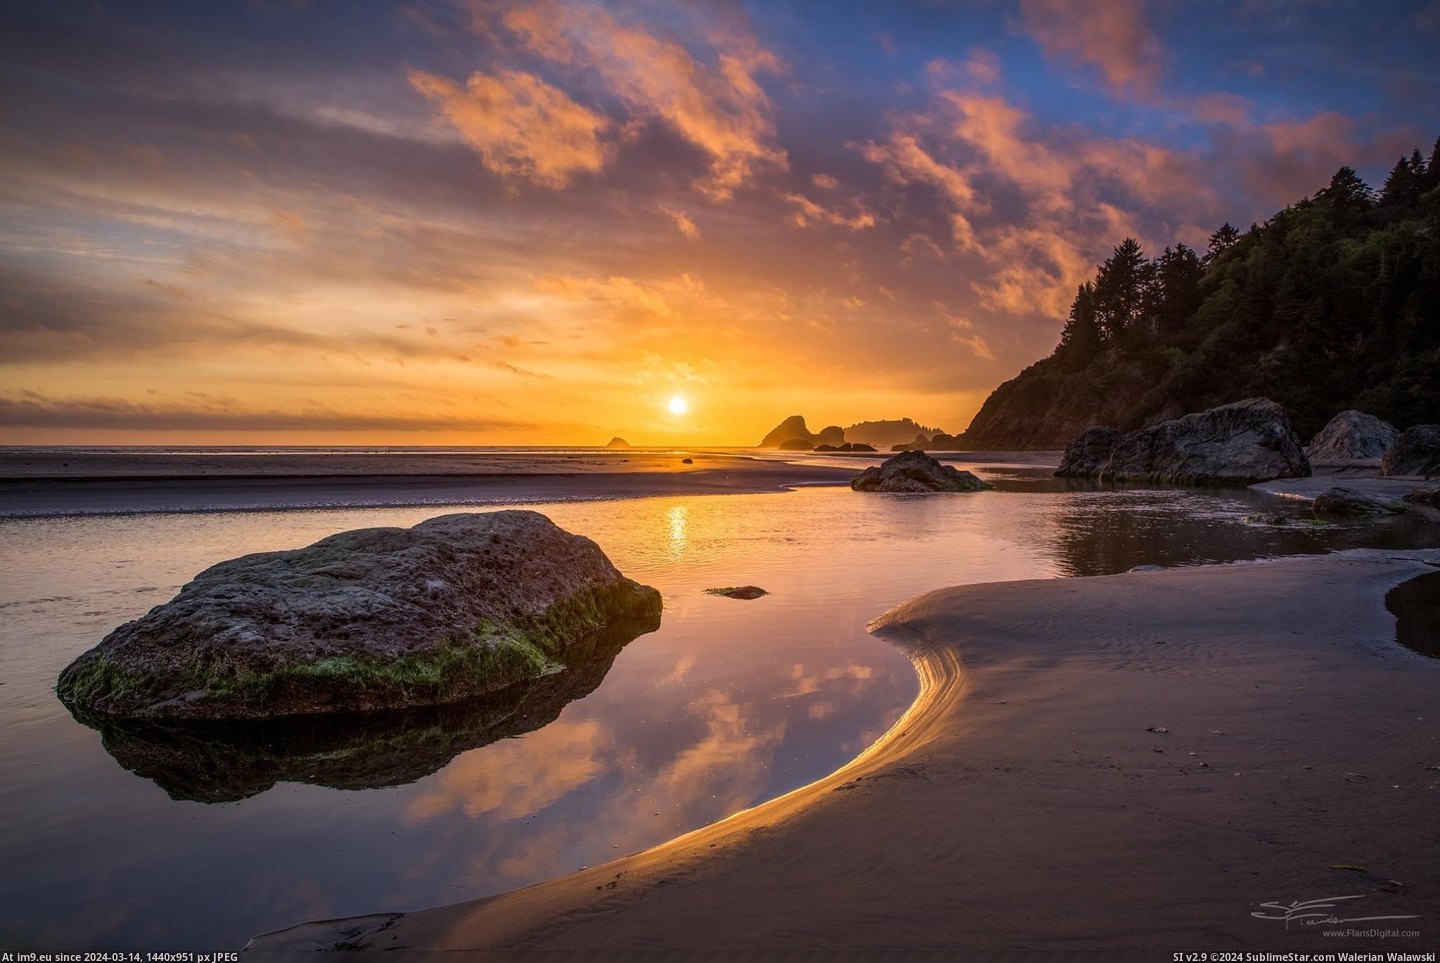 #Beach #Sunset #River #Perspective #Trinidad #2nd #Meets #2048x1365 [Earthporn] OC - 'Where River Meets Beach - 2nd Perspective' - Trinidad, CA - Moonstone Beach Sunset 6-3-15 [2048x1365] Pic. (Изображение из альбом My r/EARTHPORN favs))